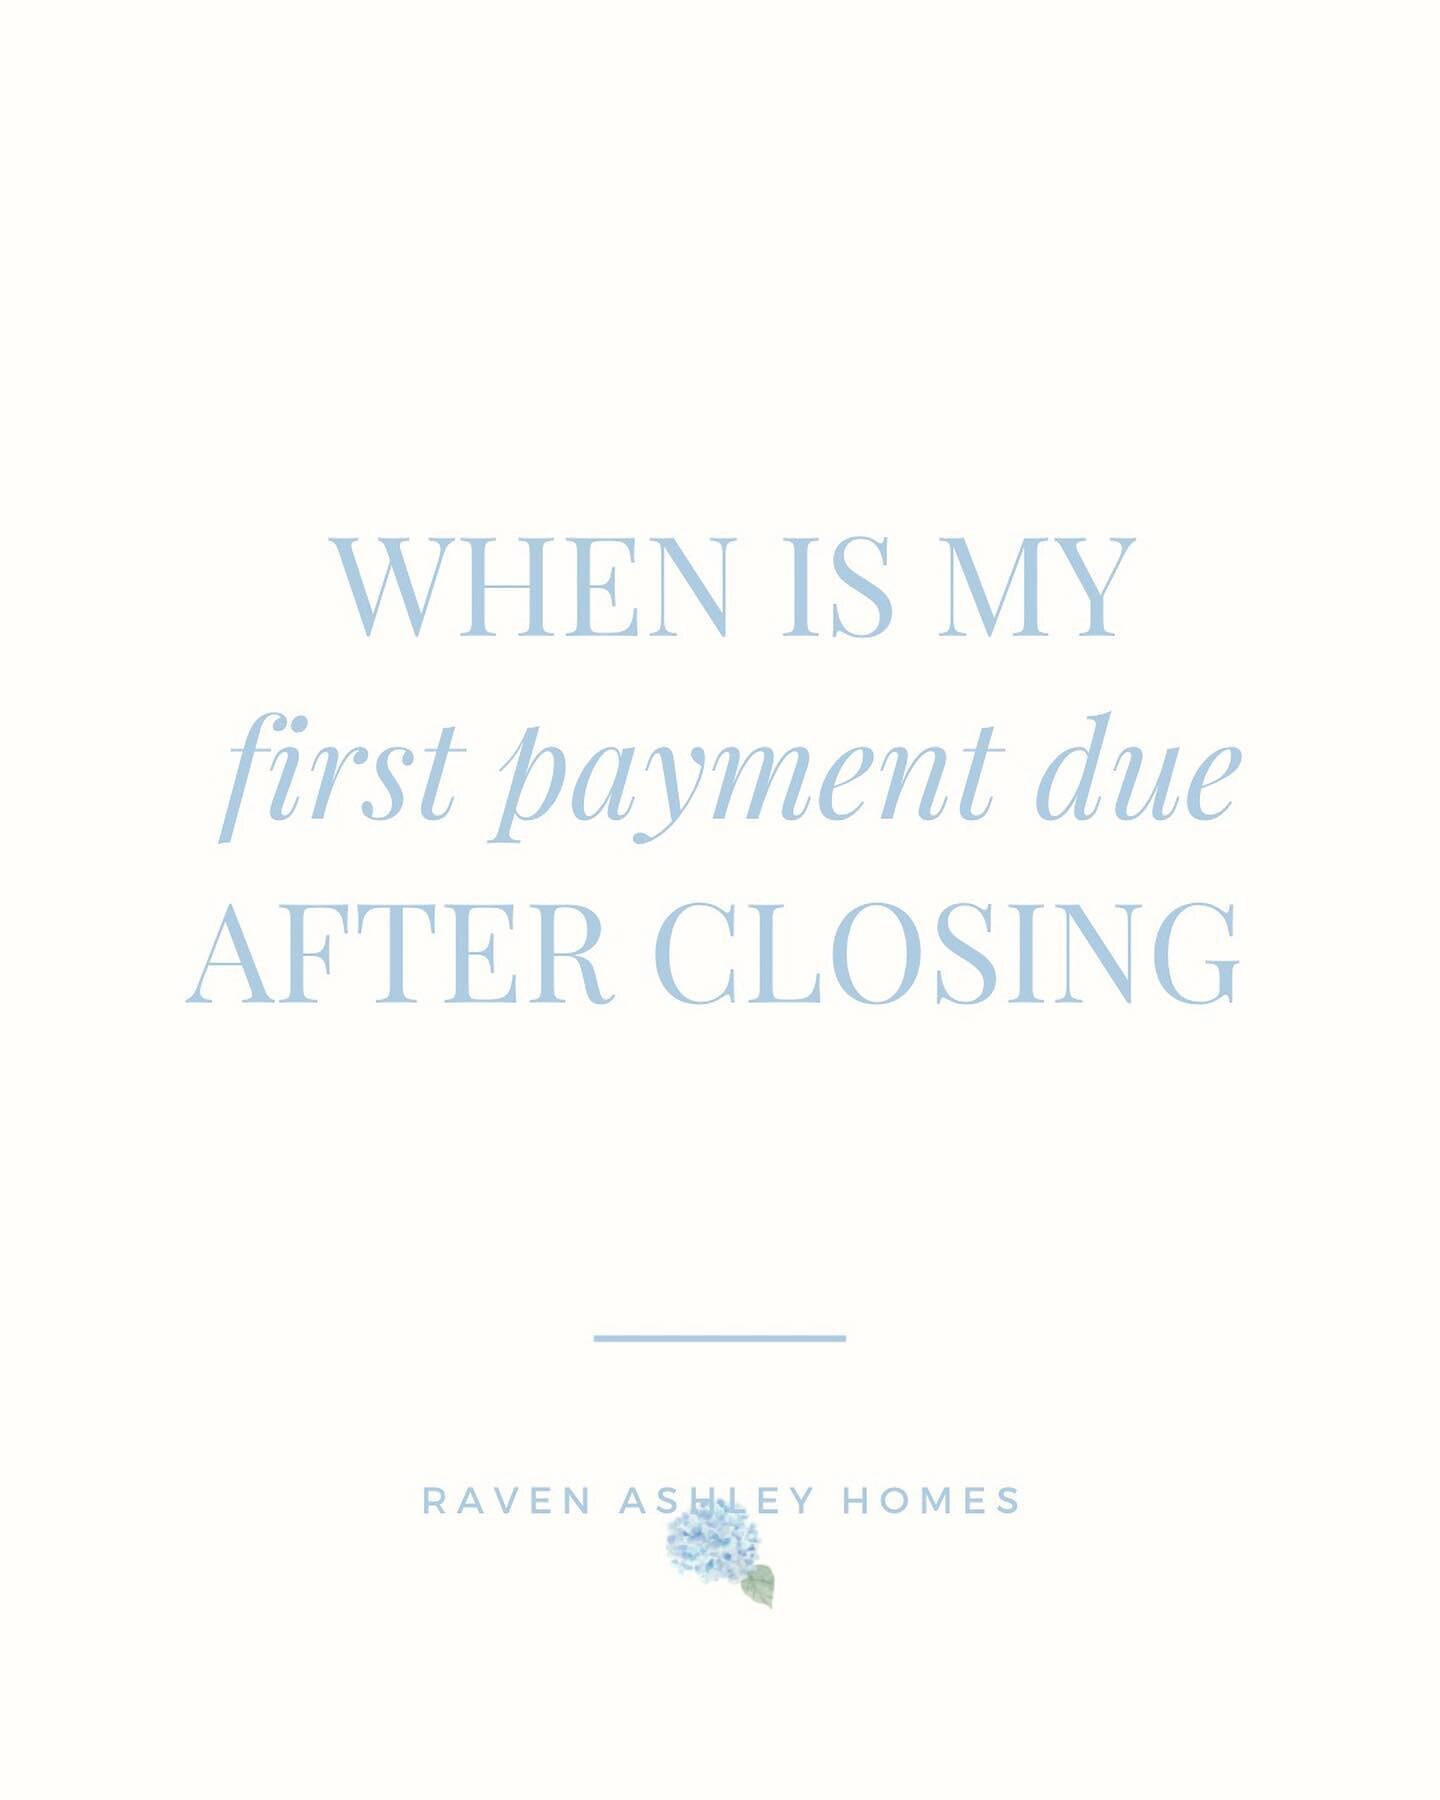 If you purchase a home this summer, this is when your first mortgage payments would be due.

Since mortgages are paid in arrears and on the first of the month, your first mortgage payment typically comes at the start of the new month after you&rsquo;